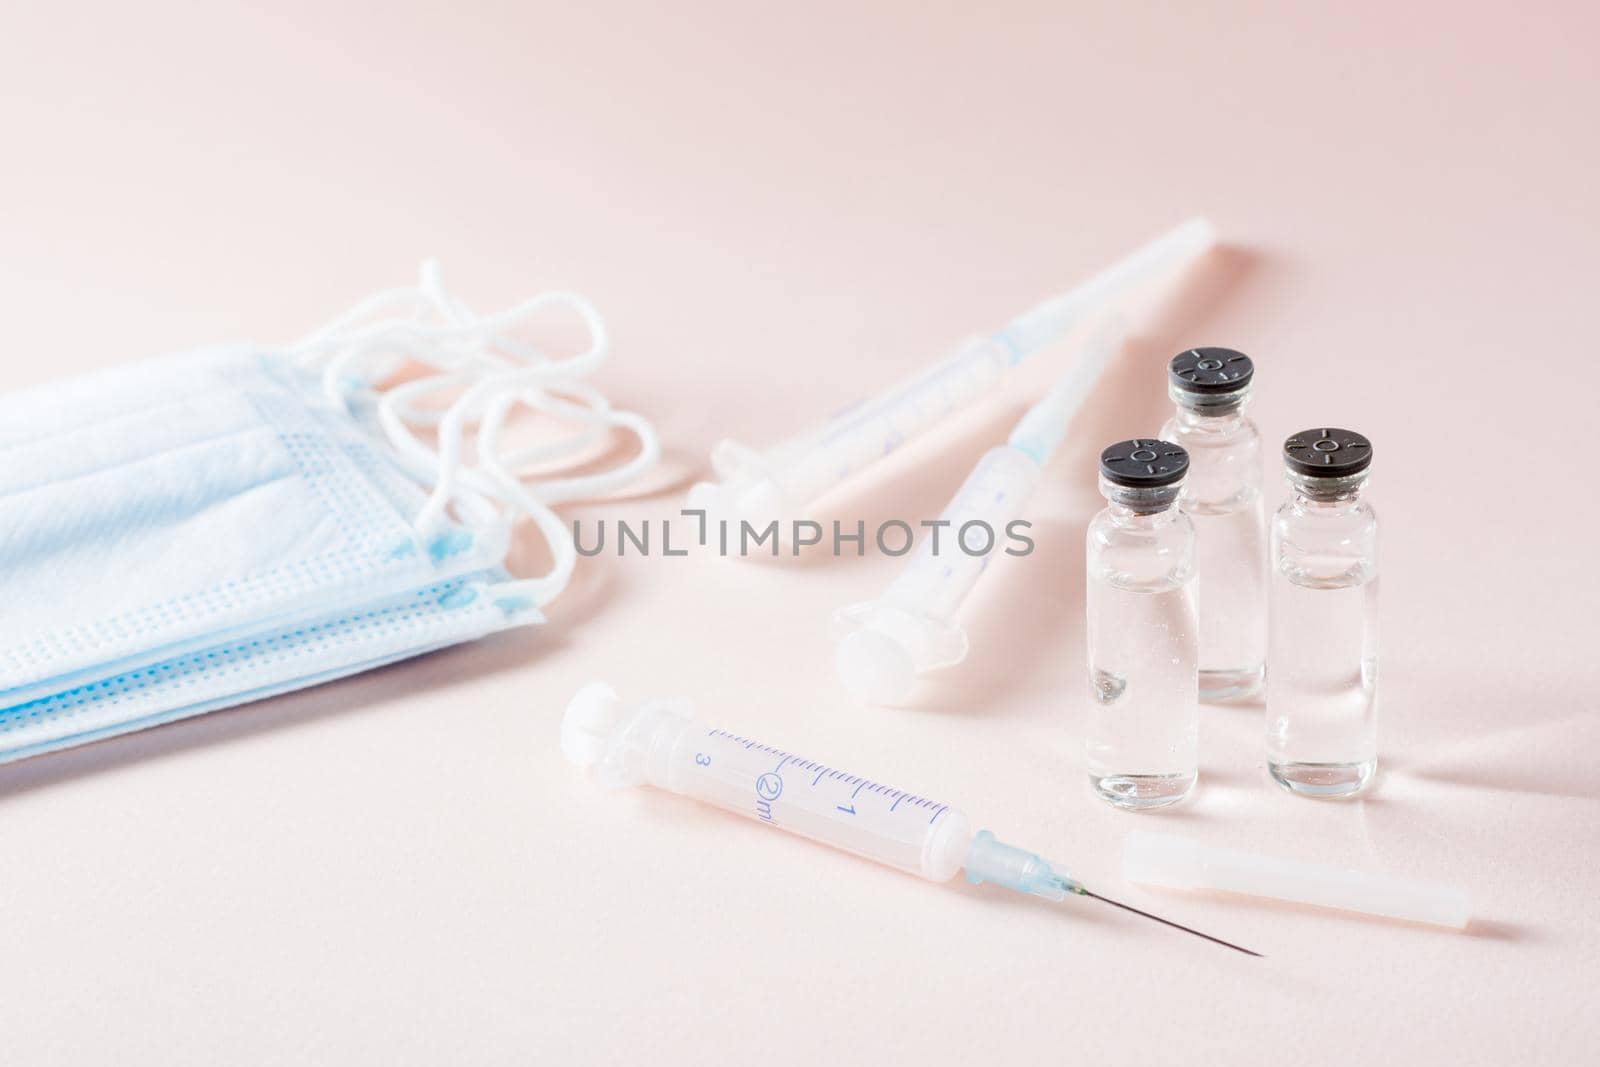 Vaccination and Immunization. Opened syringe in front of glass vials with vaccine, protective masks and clean syringes by Aleruana